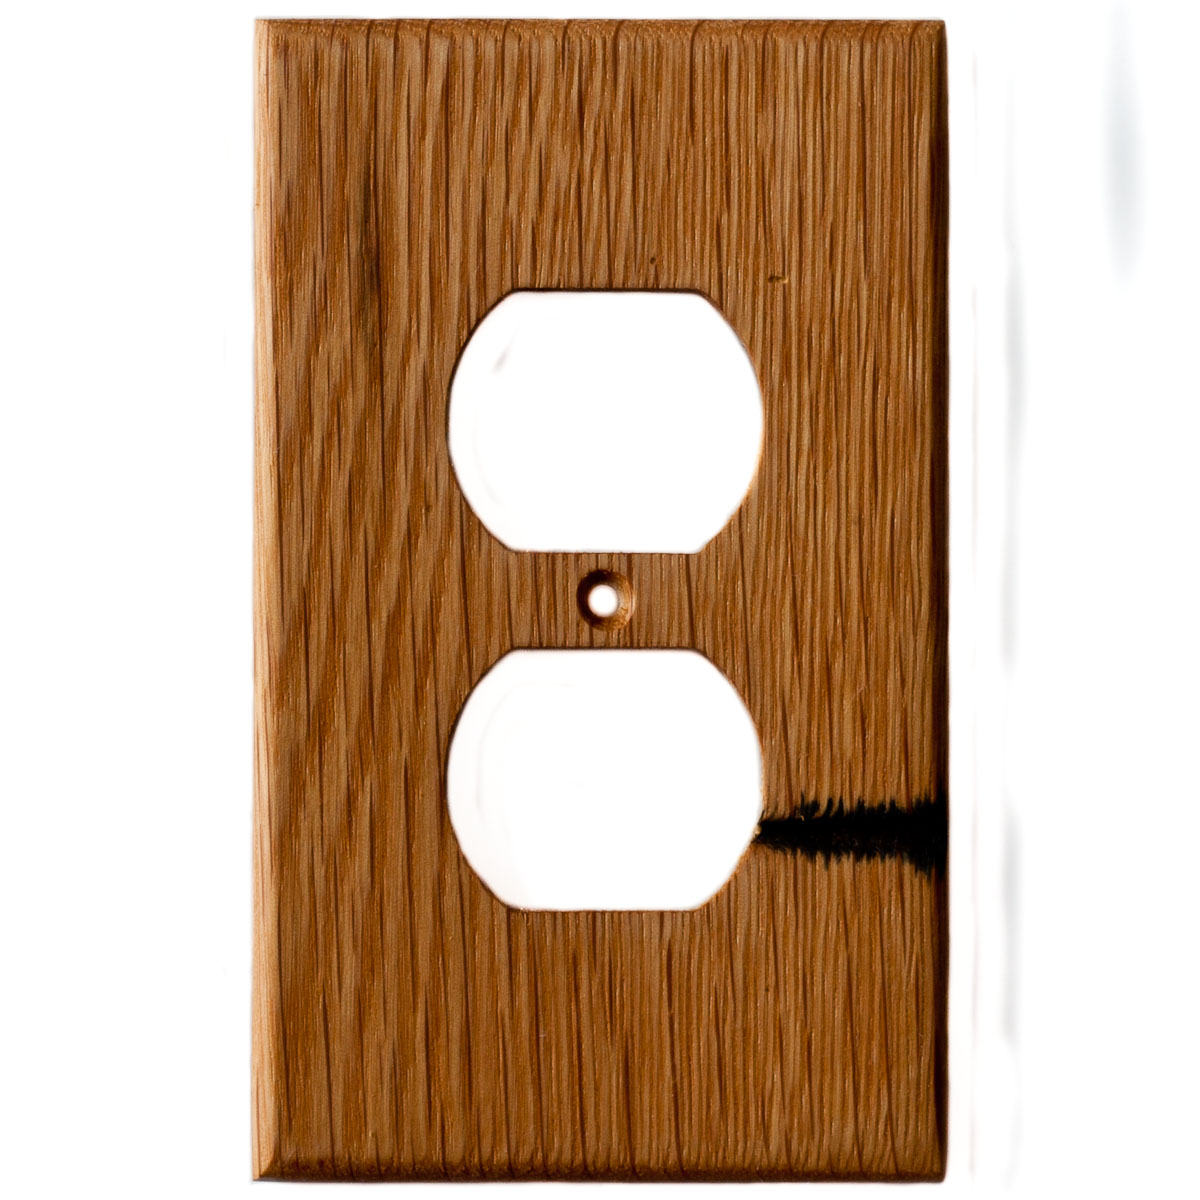 Oak Reclaimed Wood Wall Plate - 1 Gang Duplex Outlet Cover